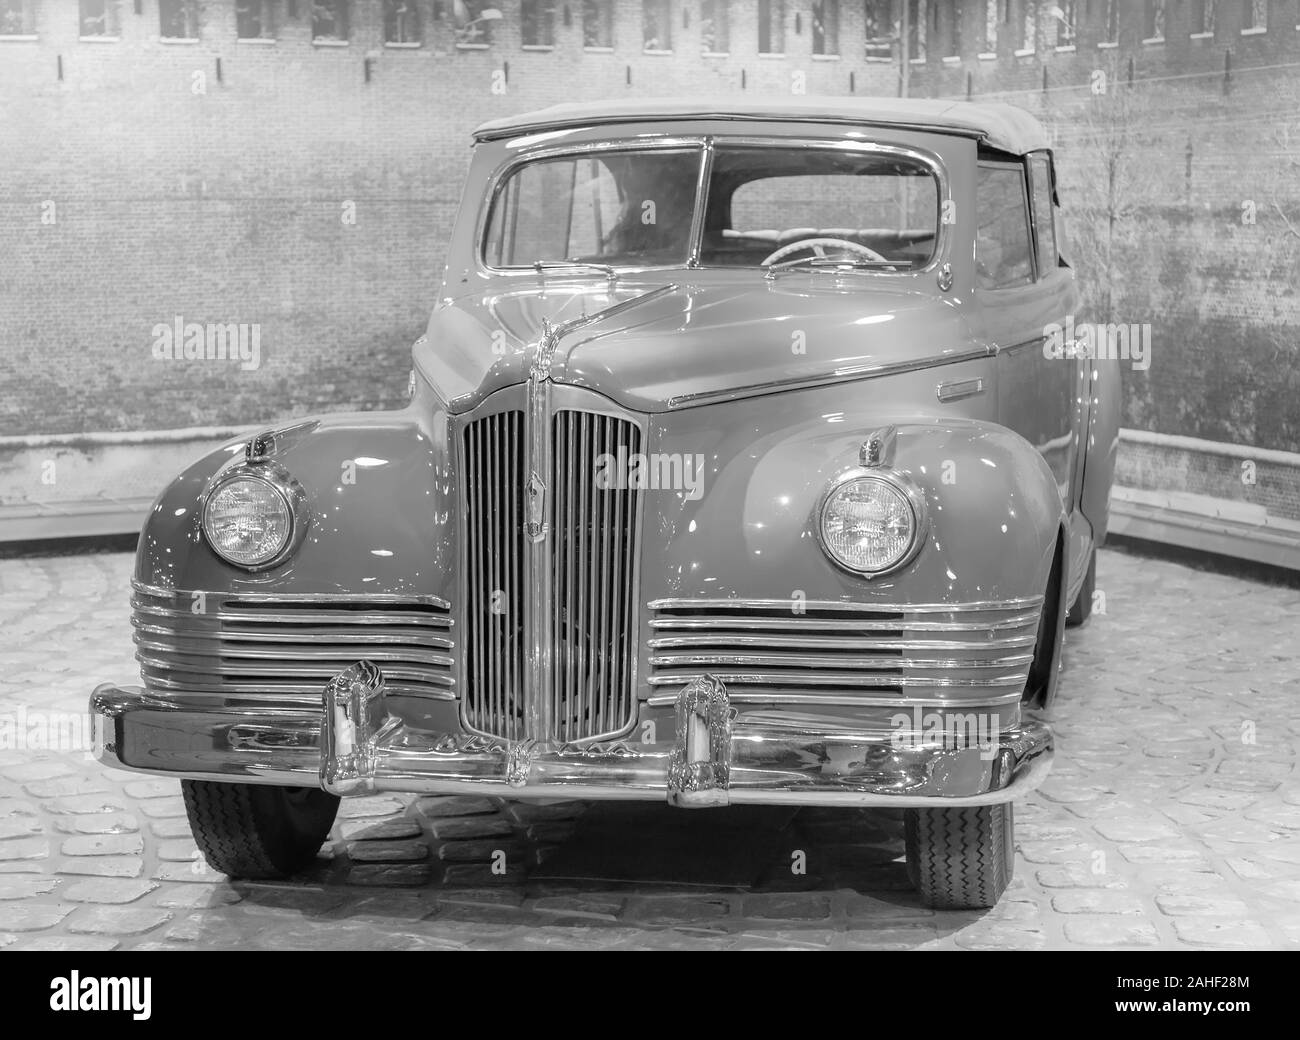 MOSCOW, RUSSIA - APRIL 24, 2016: Car ZIS 110 B is produced in the Soviet Union (USSR), museum exhibit Vadim Zadorozhnogo in Moscow. Stock Photo